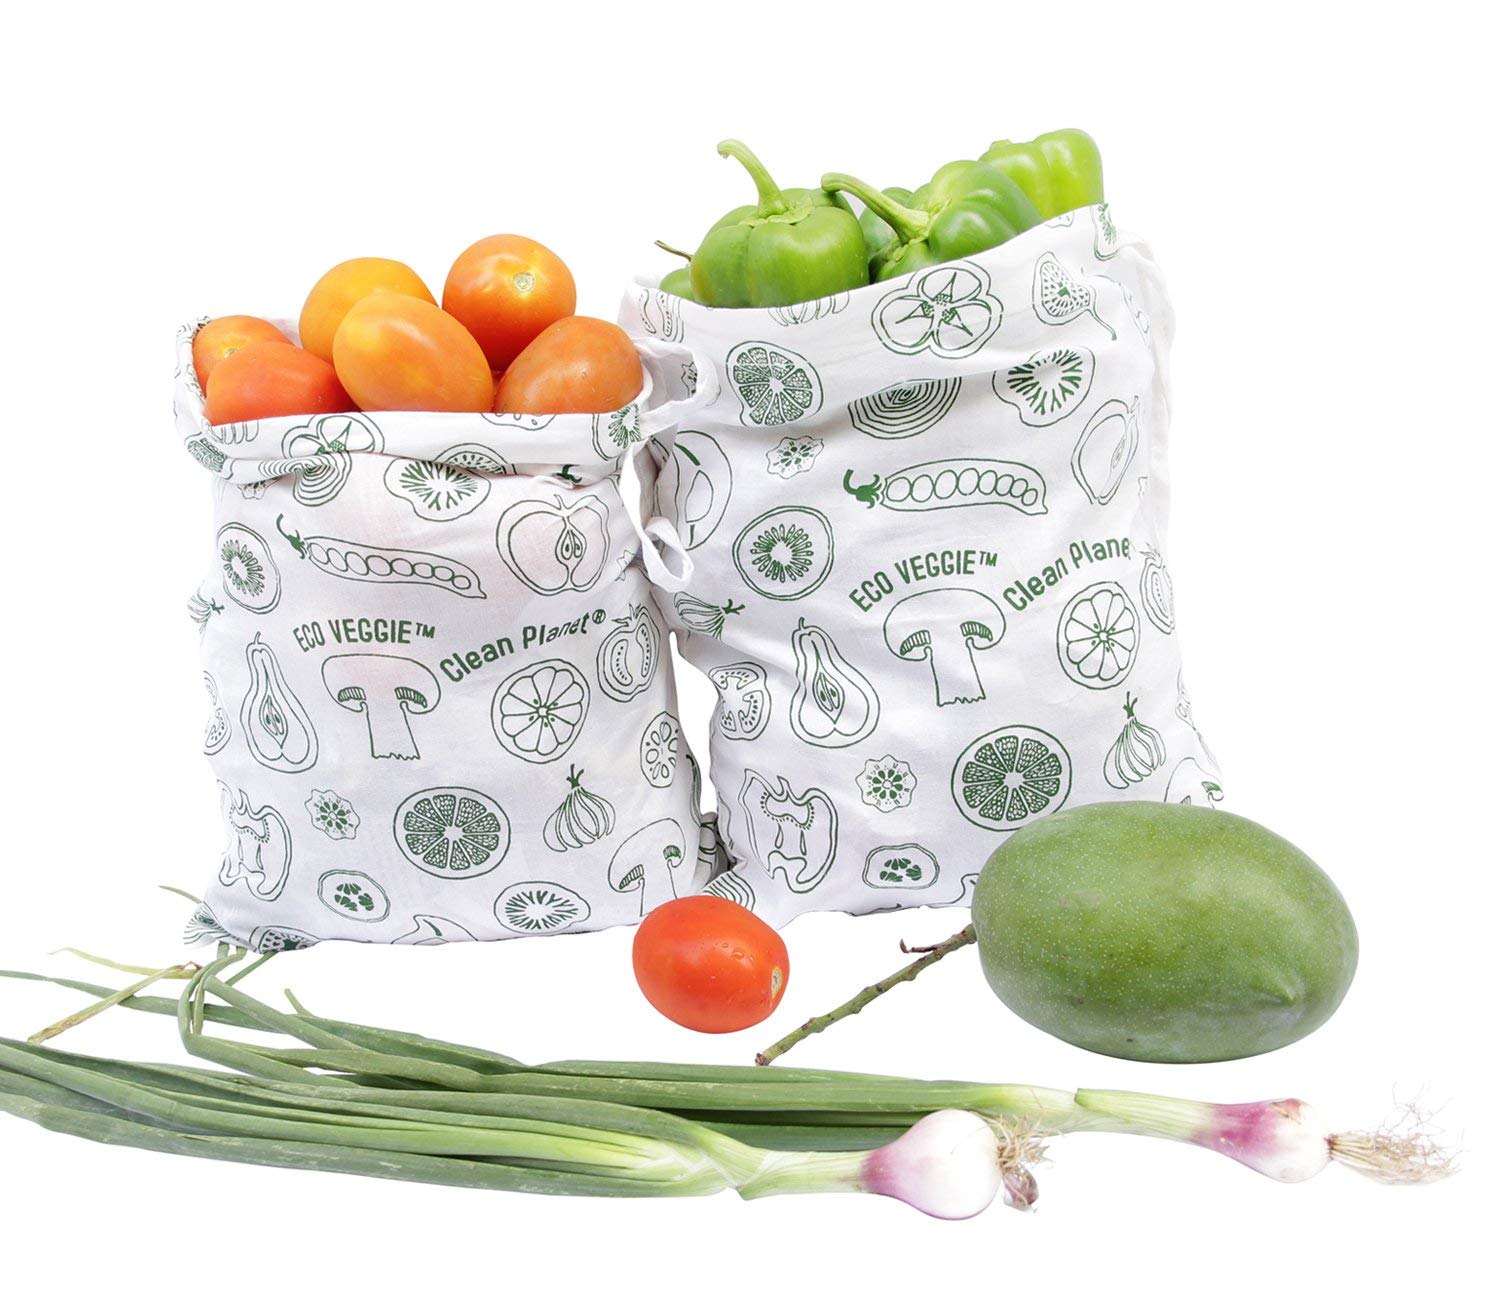 Clean Planet Fridge Cotton Vegetable & Fruits Storage Bag with Drawstring Eco-Friendly, Non-Toxic, Washable, Reusable (Pack of 2, Regular - 10" x 12")